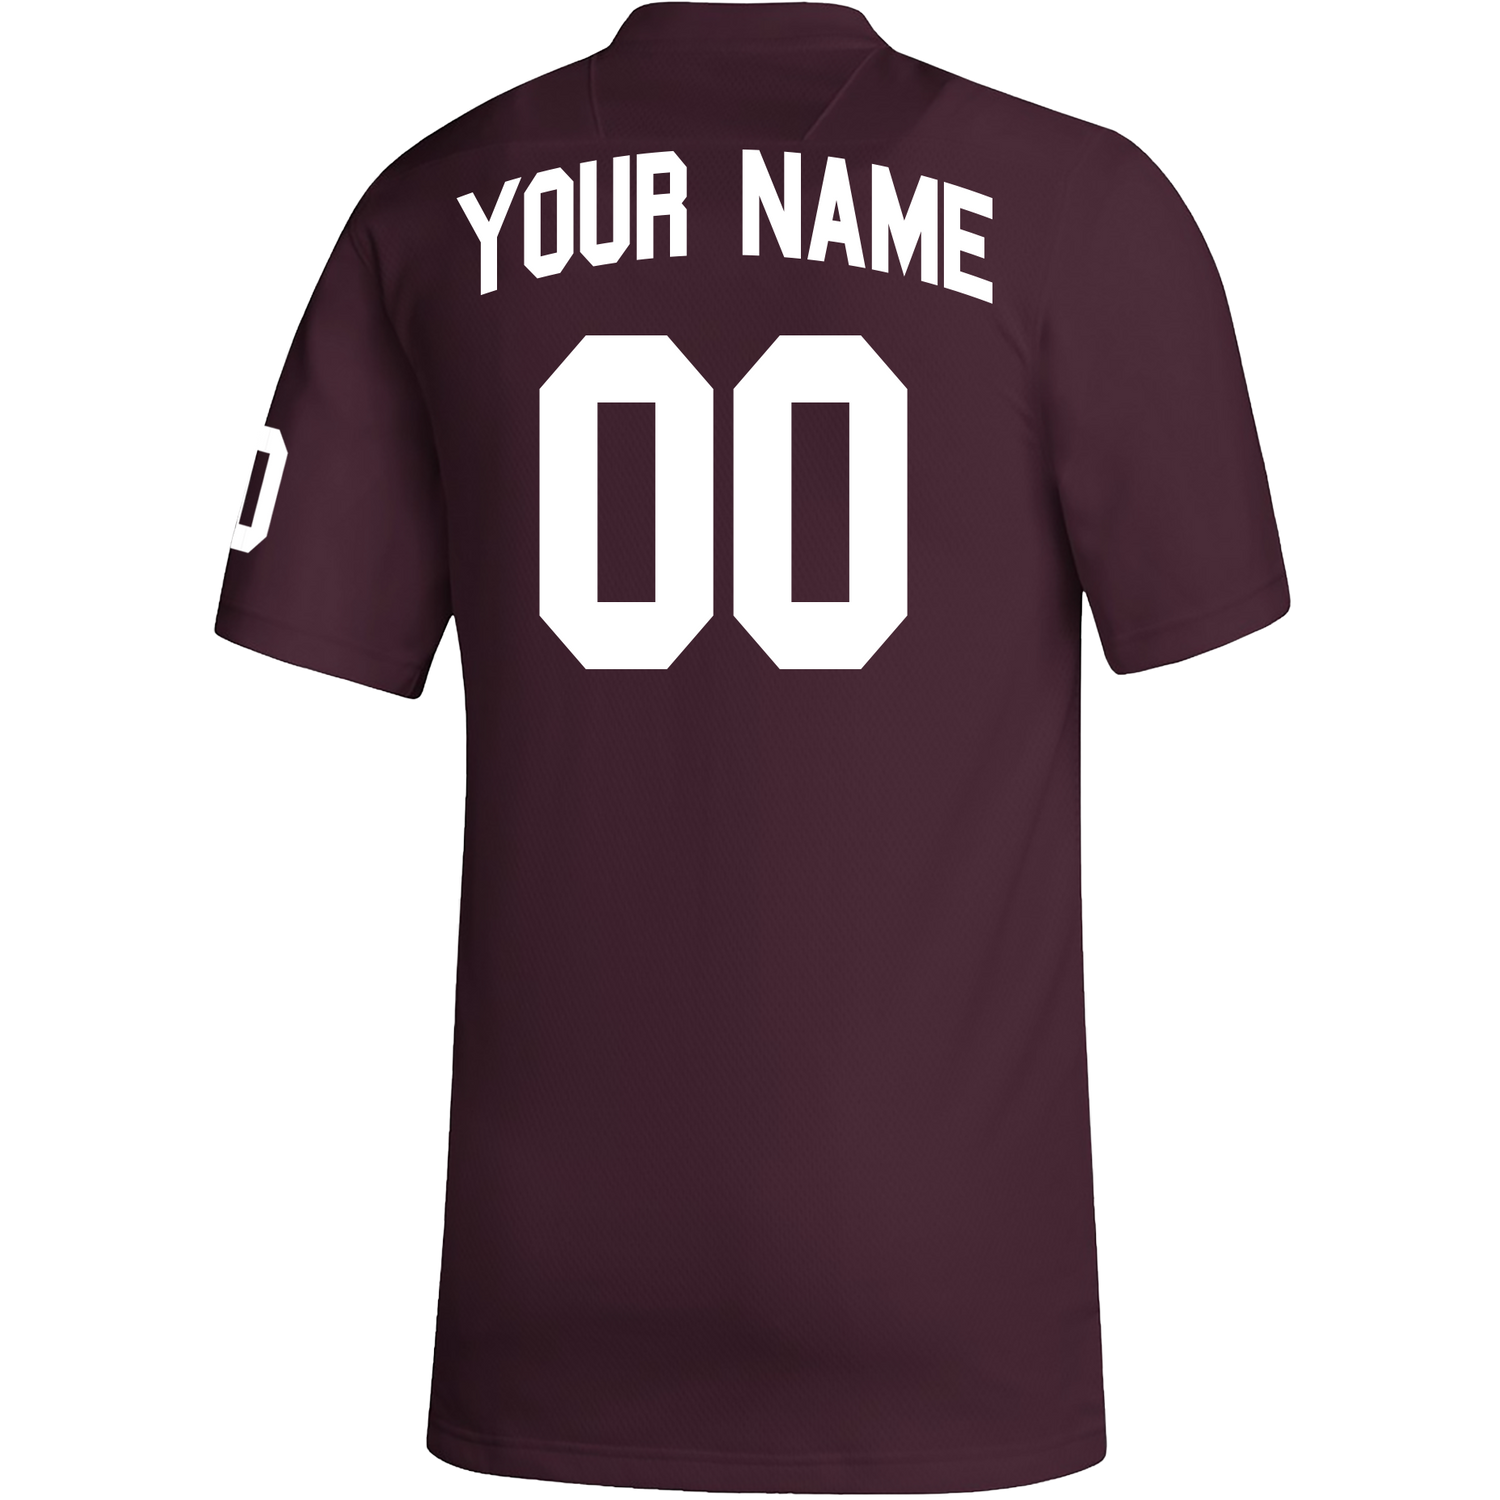 Custom Brown Gold-White Authentic Baseball Jersey Women's Size:M